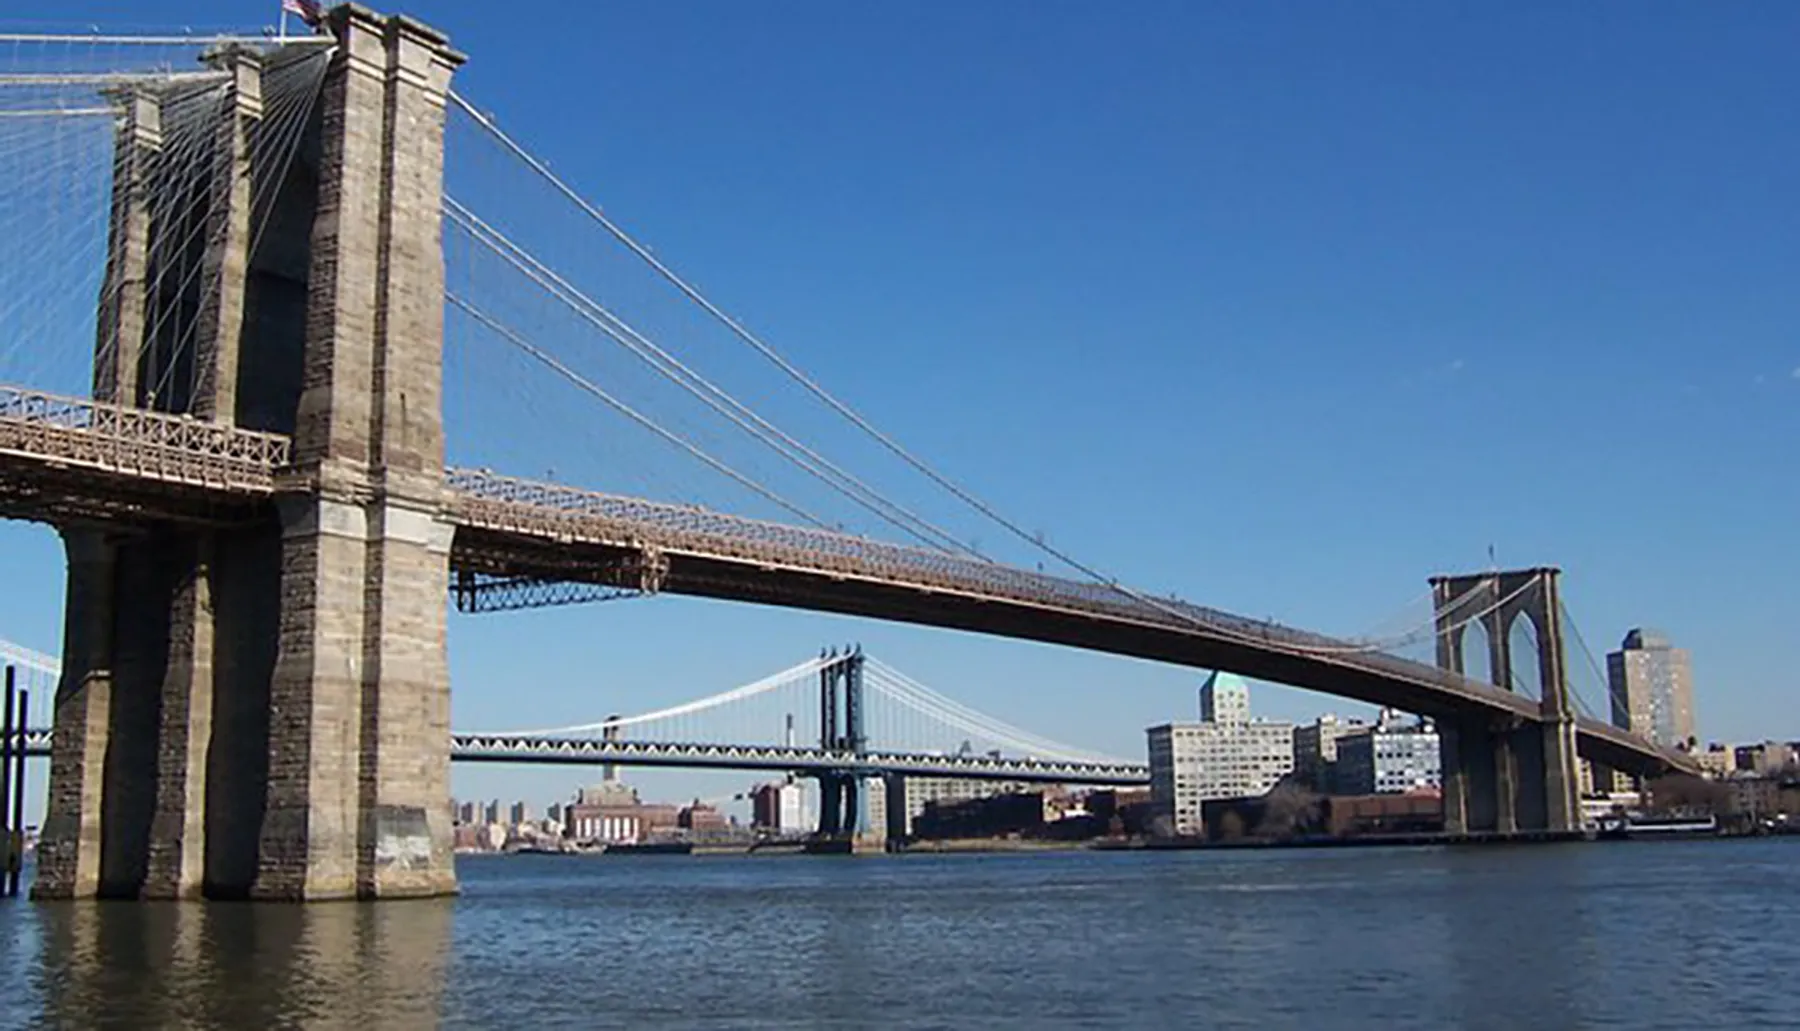 The image shows the Brooklyn Bridge, an iconic suspension bridge spanning the East River between Manhattan and Brooklyn in New York City, with the Manhattan Bridge in the background.